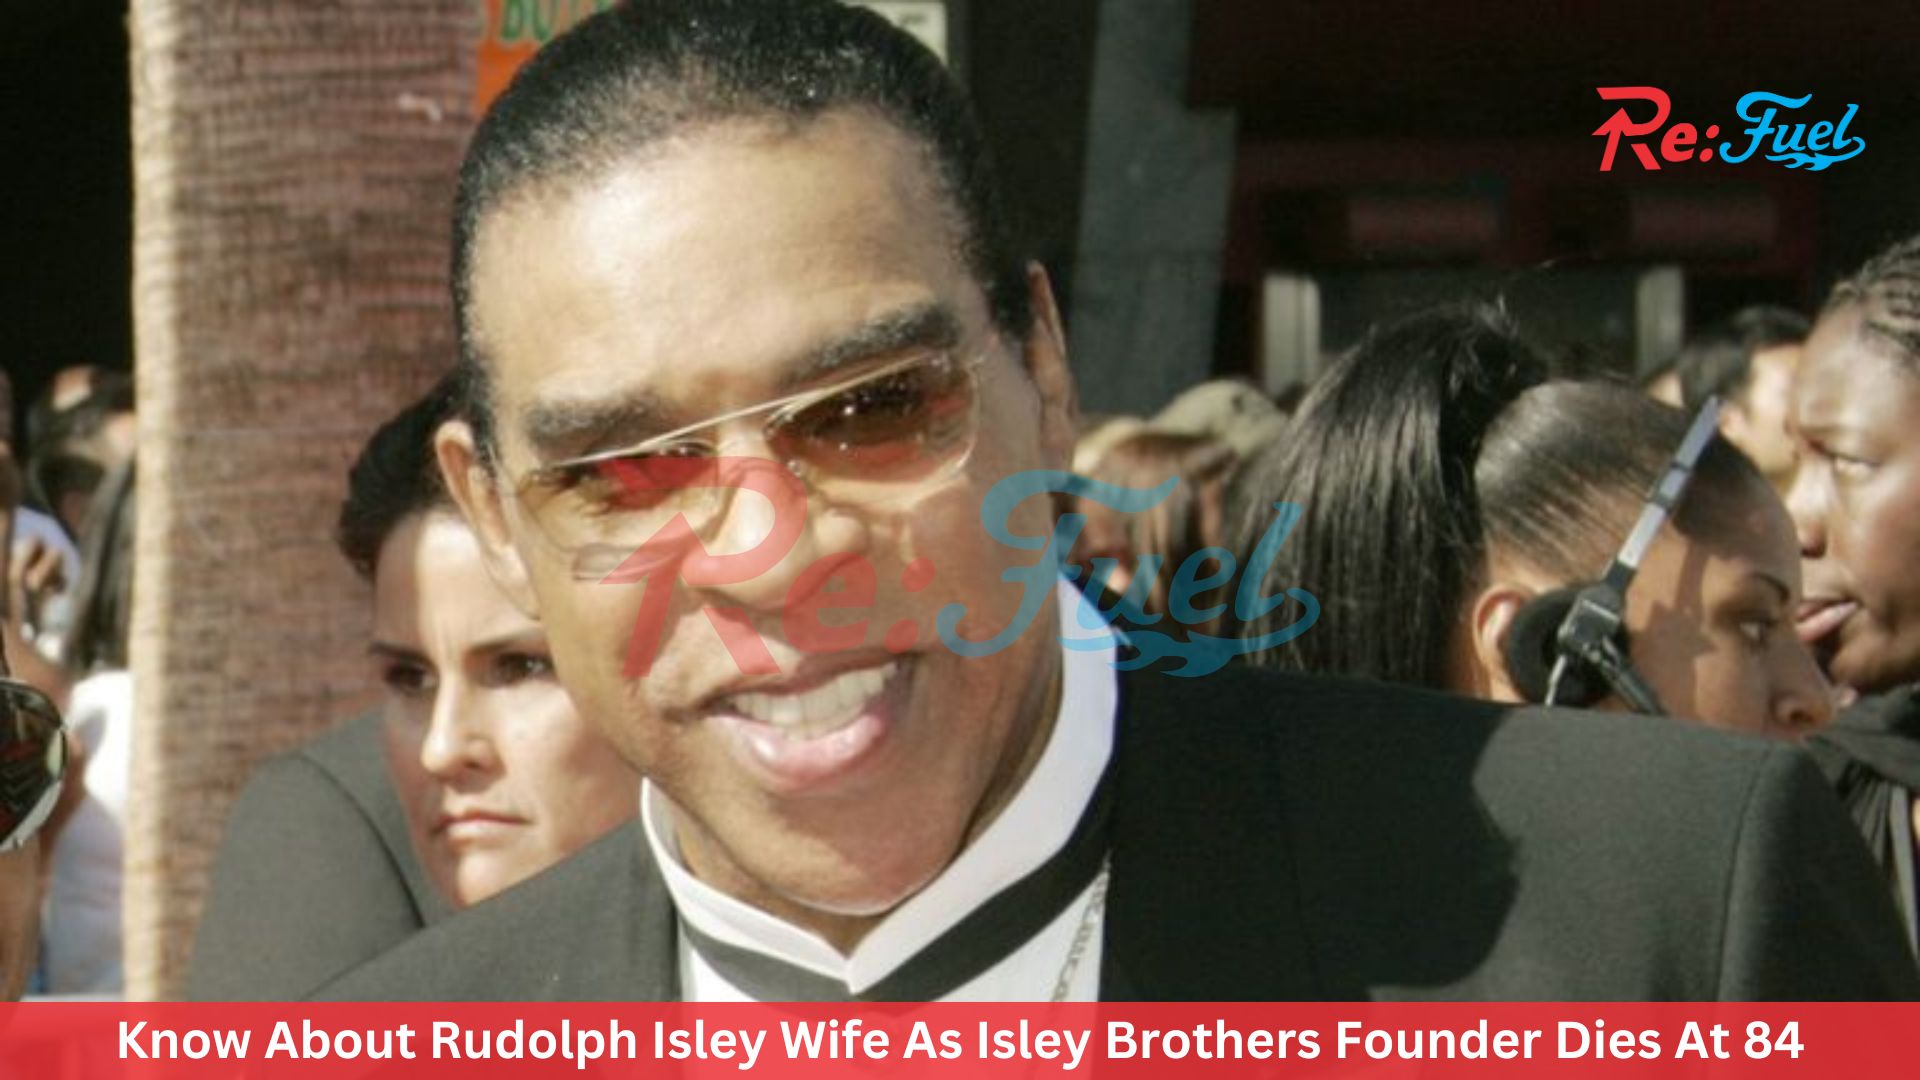 Know About Rudolph Isley Wife As Isley Brothers Founder Dies At 84